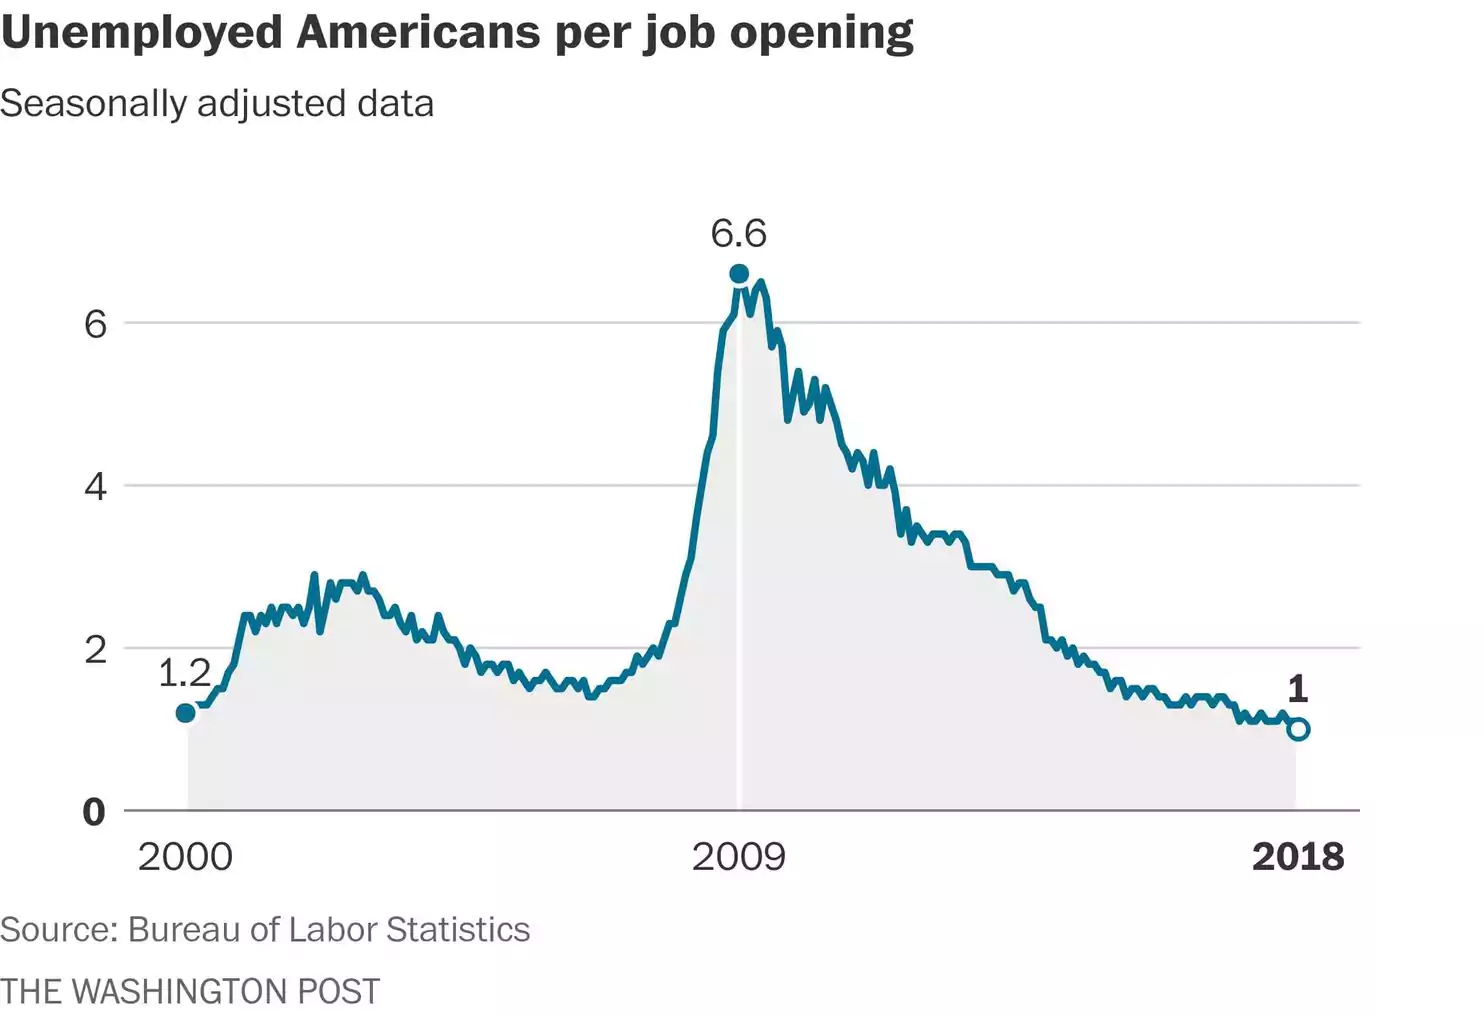 THE U.S. NOW HAS A RECORD 6.6 MILLION JOB OPENINGS